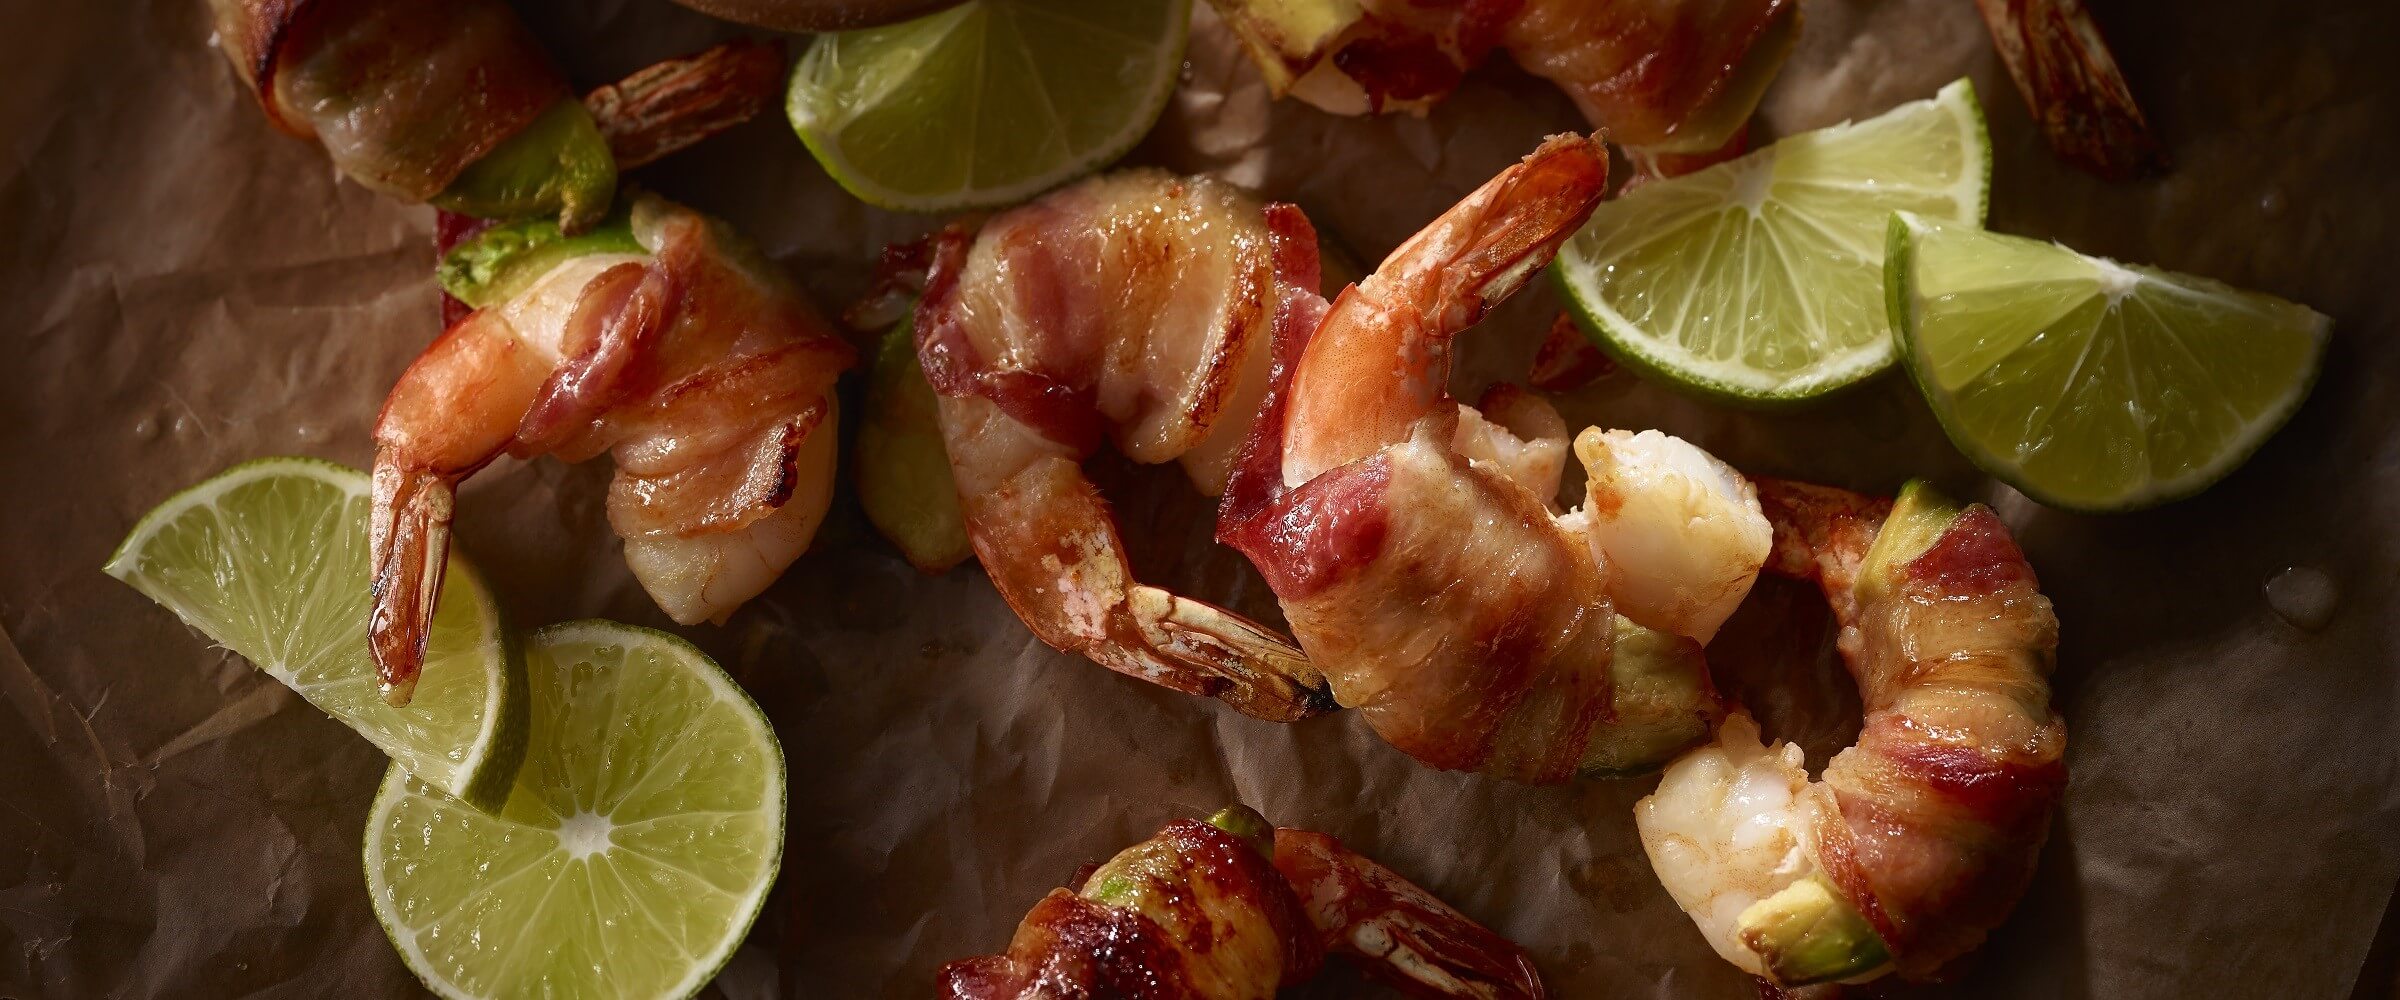 bacon wrapped shrimp and avocado with lime wedges